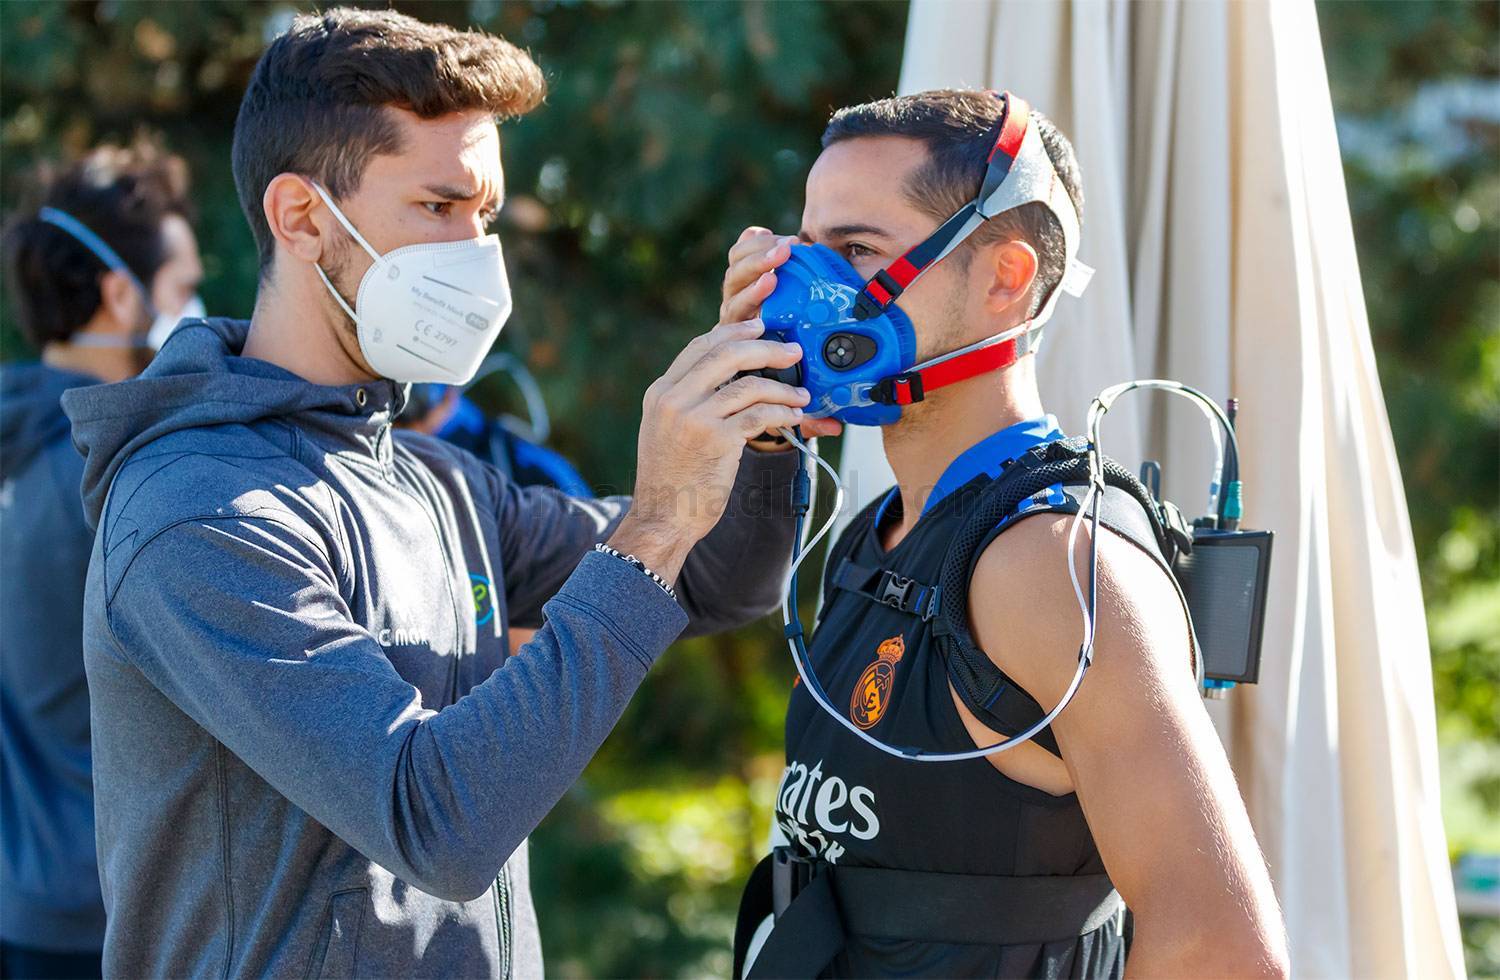 Real Madrid carry out fitness tests at Valdebebas